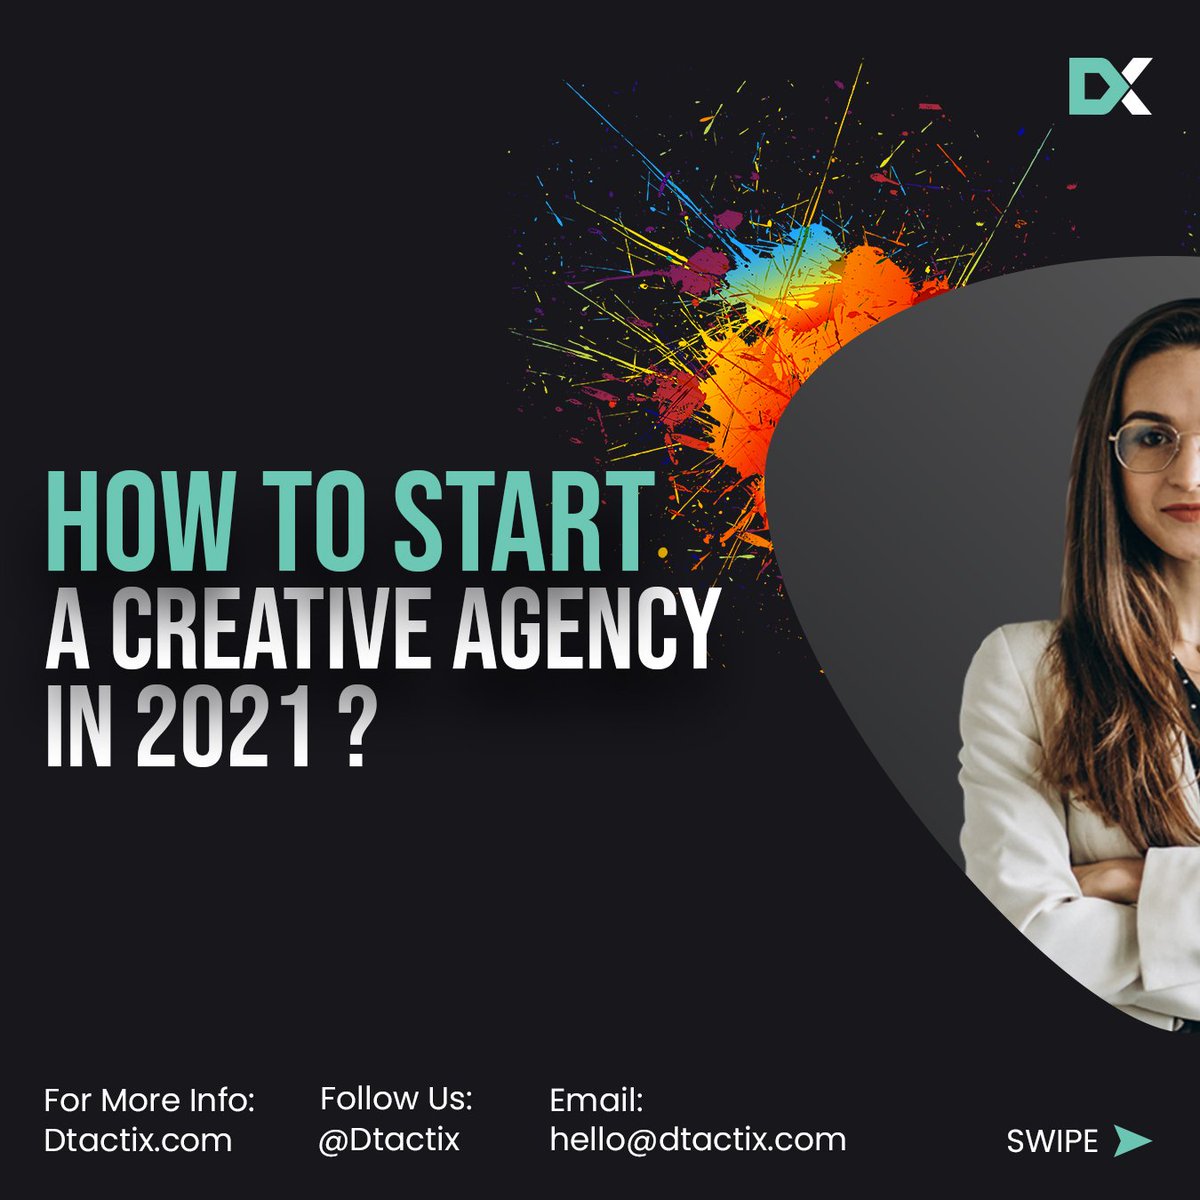 Learn the Super-secret recipe for a successful Creative Agency.

The full-proof creative plan of action to make your agency a HIT.

A THREAD..

#dtactix #creativeagency #digital #marketing #carousel #carouselpost #information #agency #lahore #pakistan #creativity #art